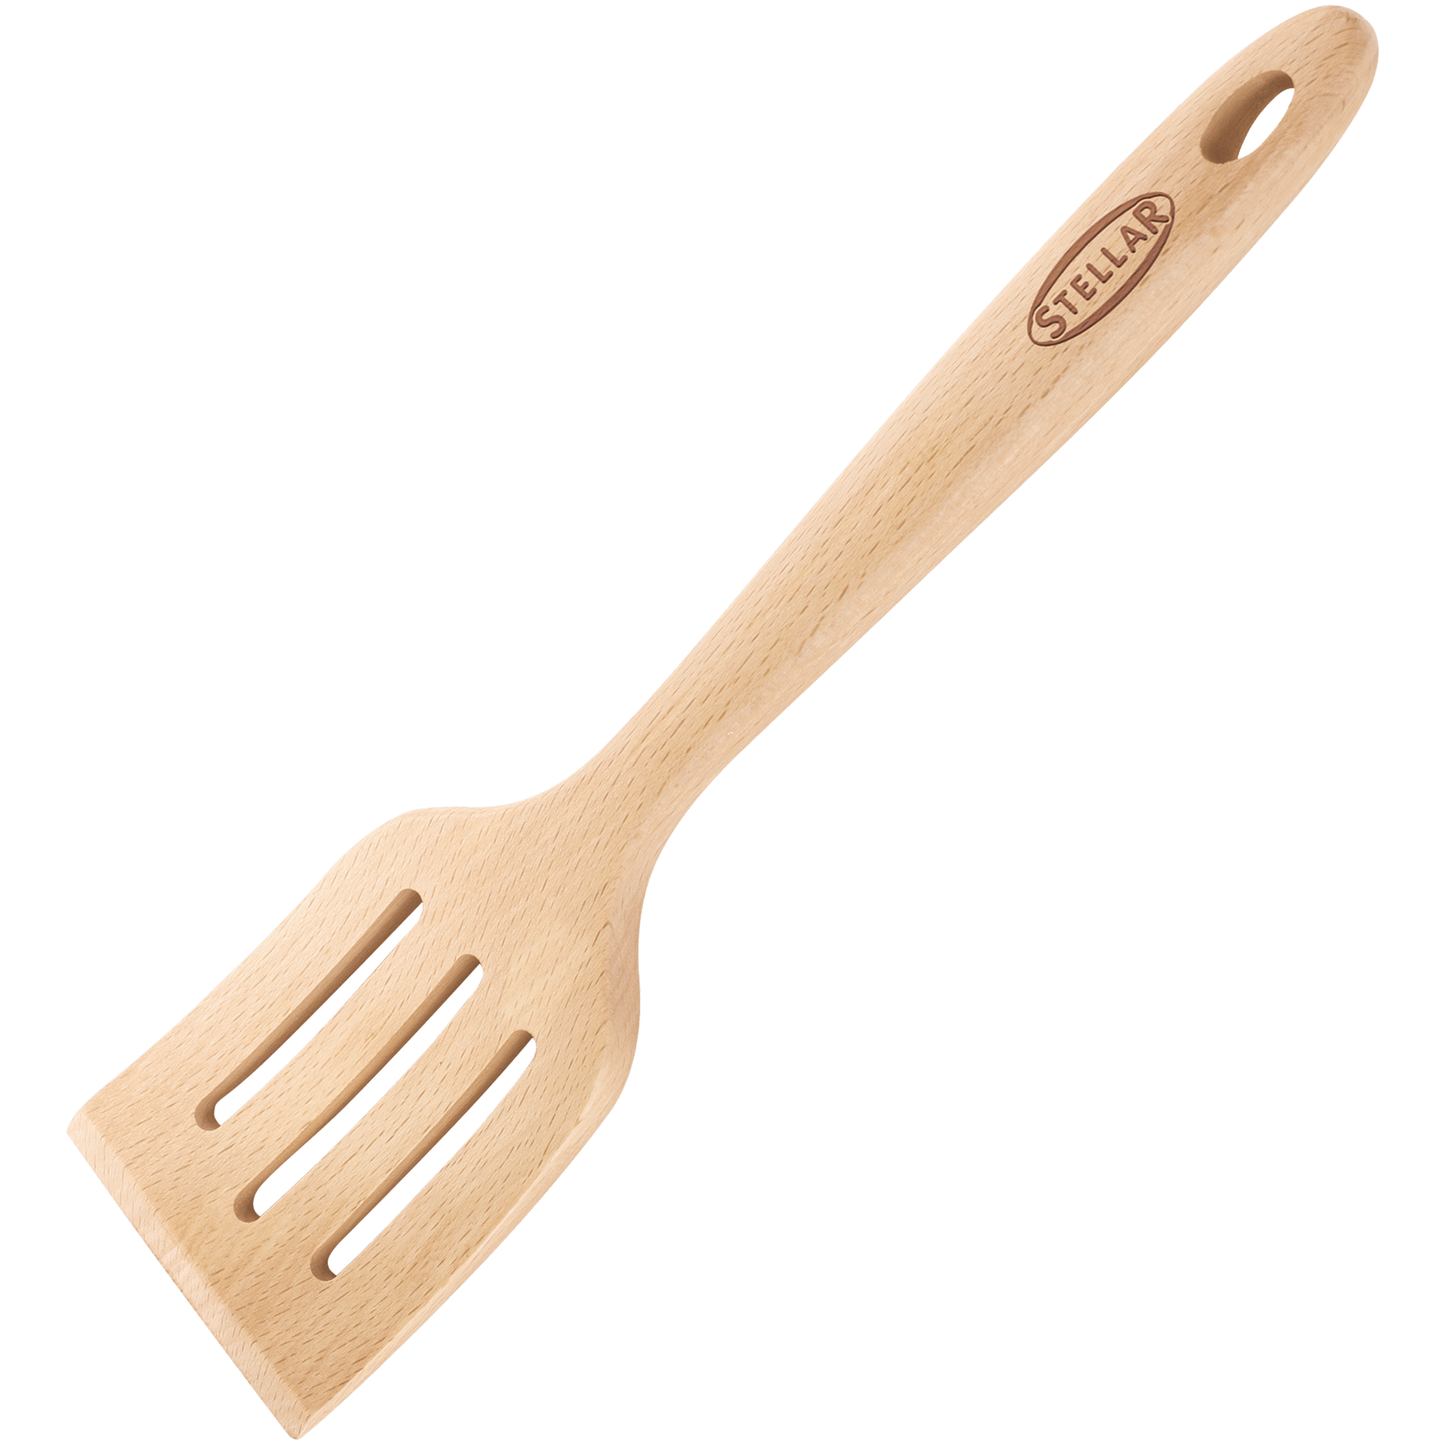 a beechwood slotted turner with the Stellar logo printed on the handle